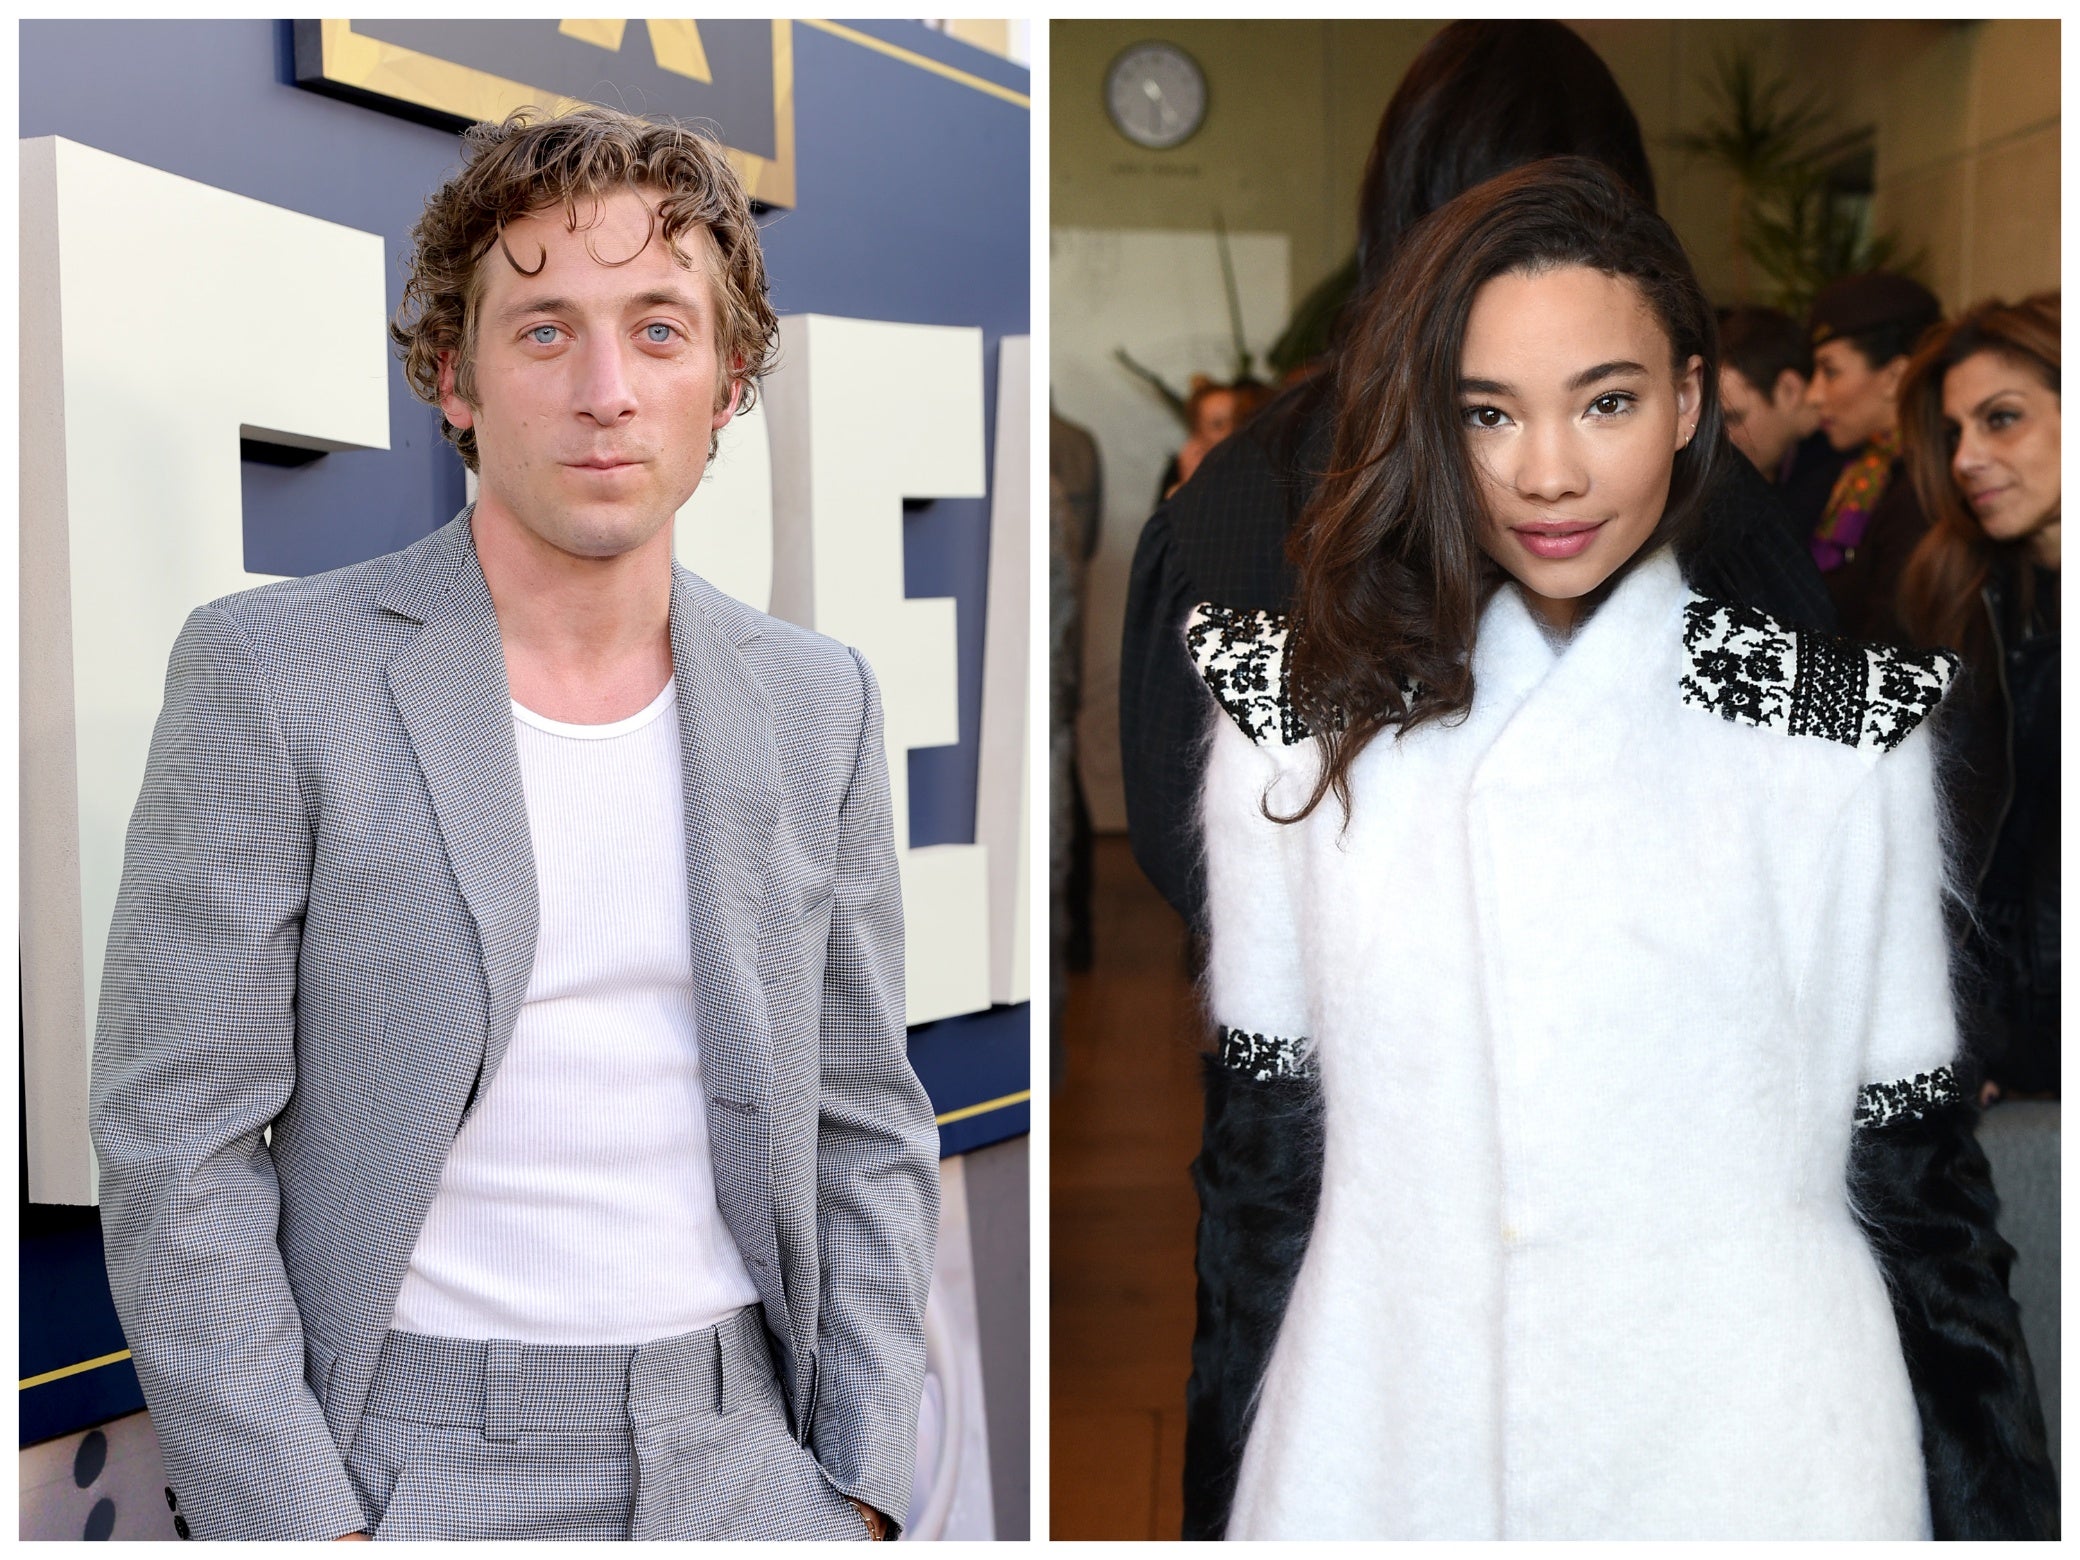 ‘The Bear’ star Jeremy Allen White is reportedly dating model Ashley Moore